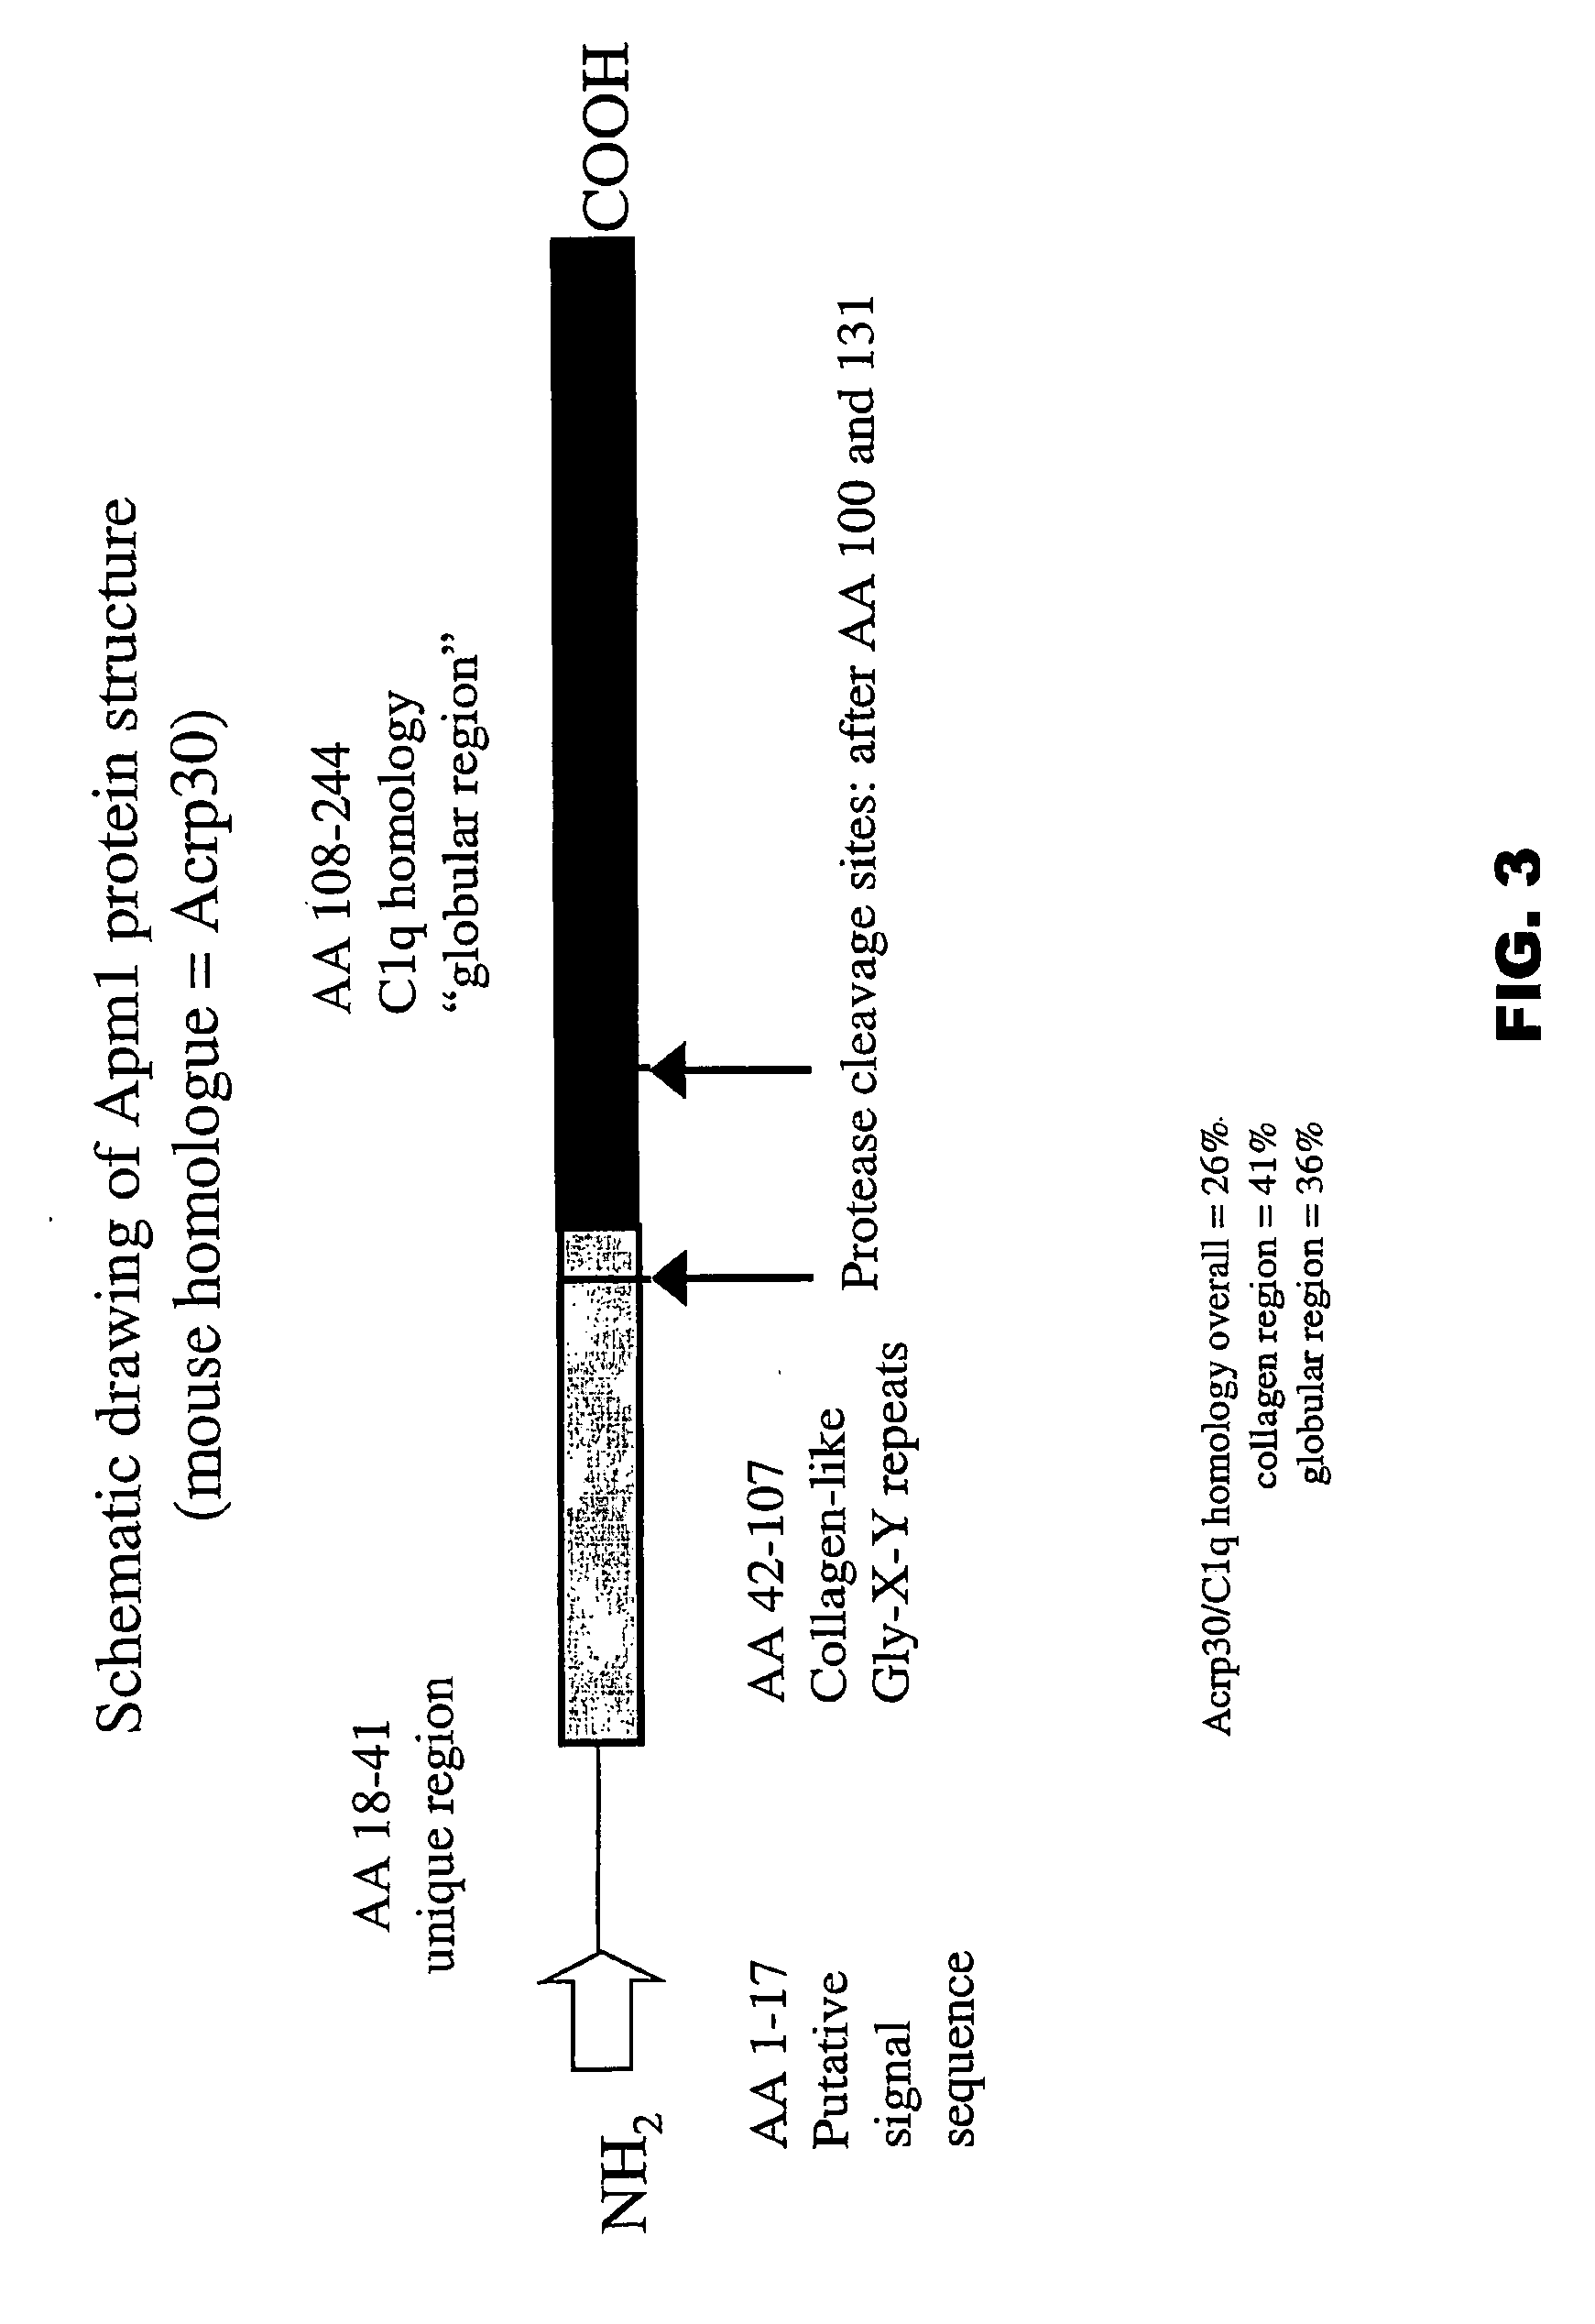 Homotrimeric extended obg3 globular head and uses thereof